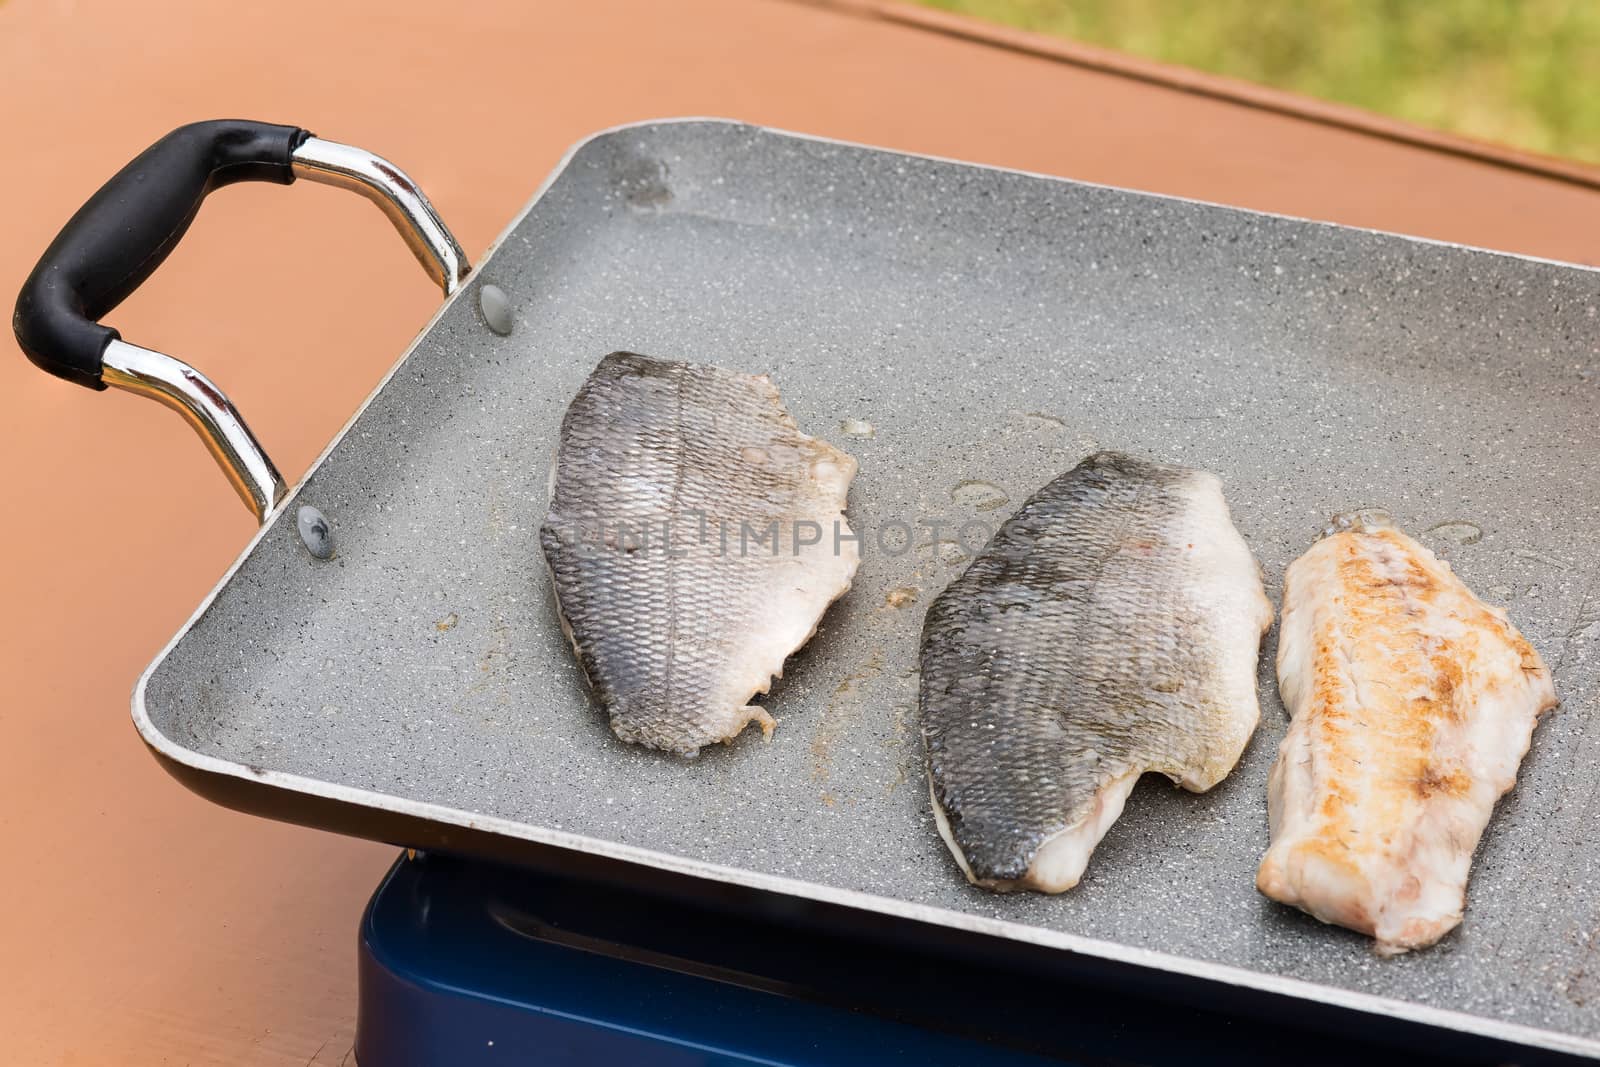 Pictured three fillets of sea bream cooked on the grill outdoor.